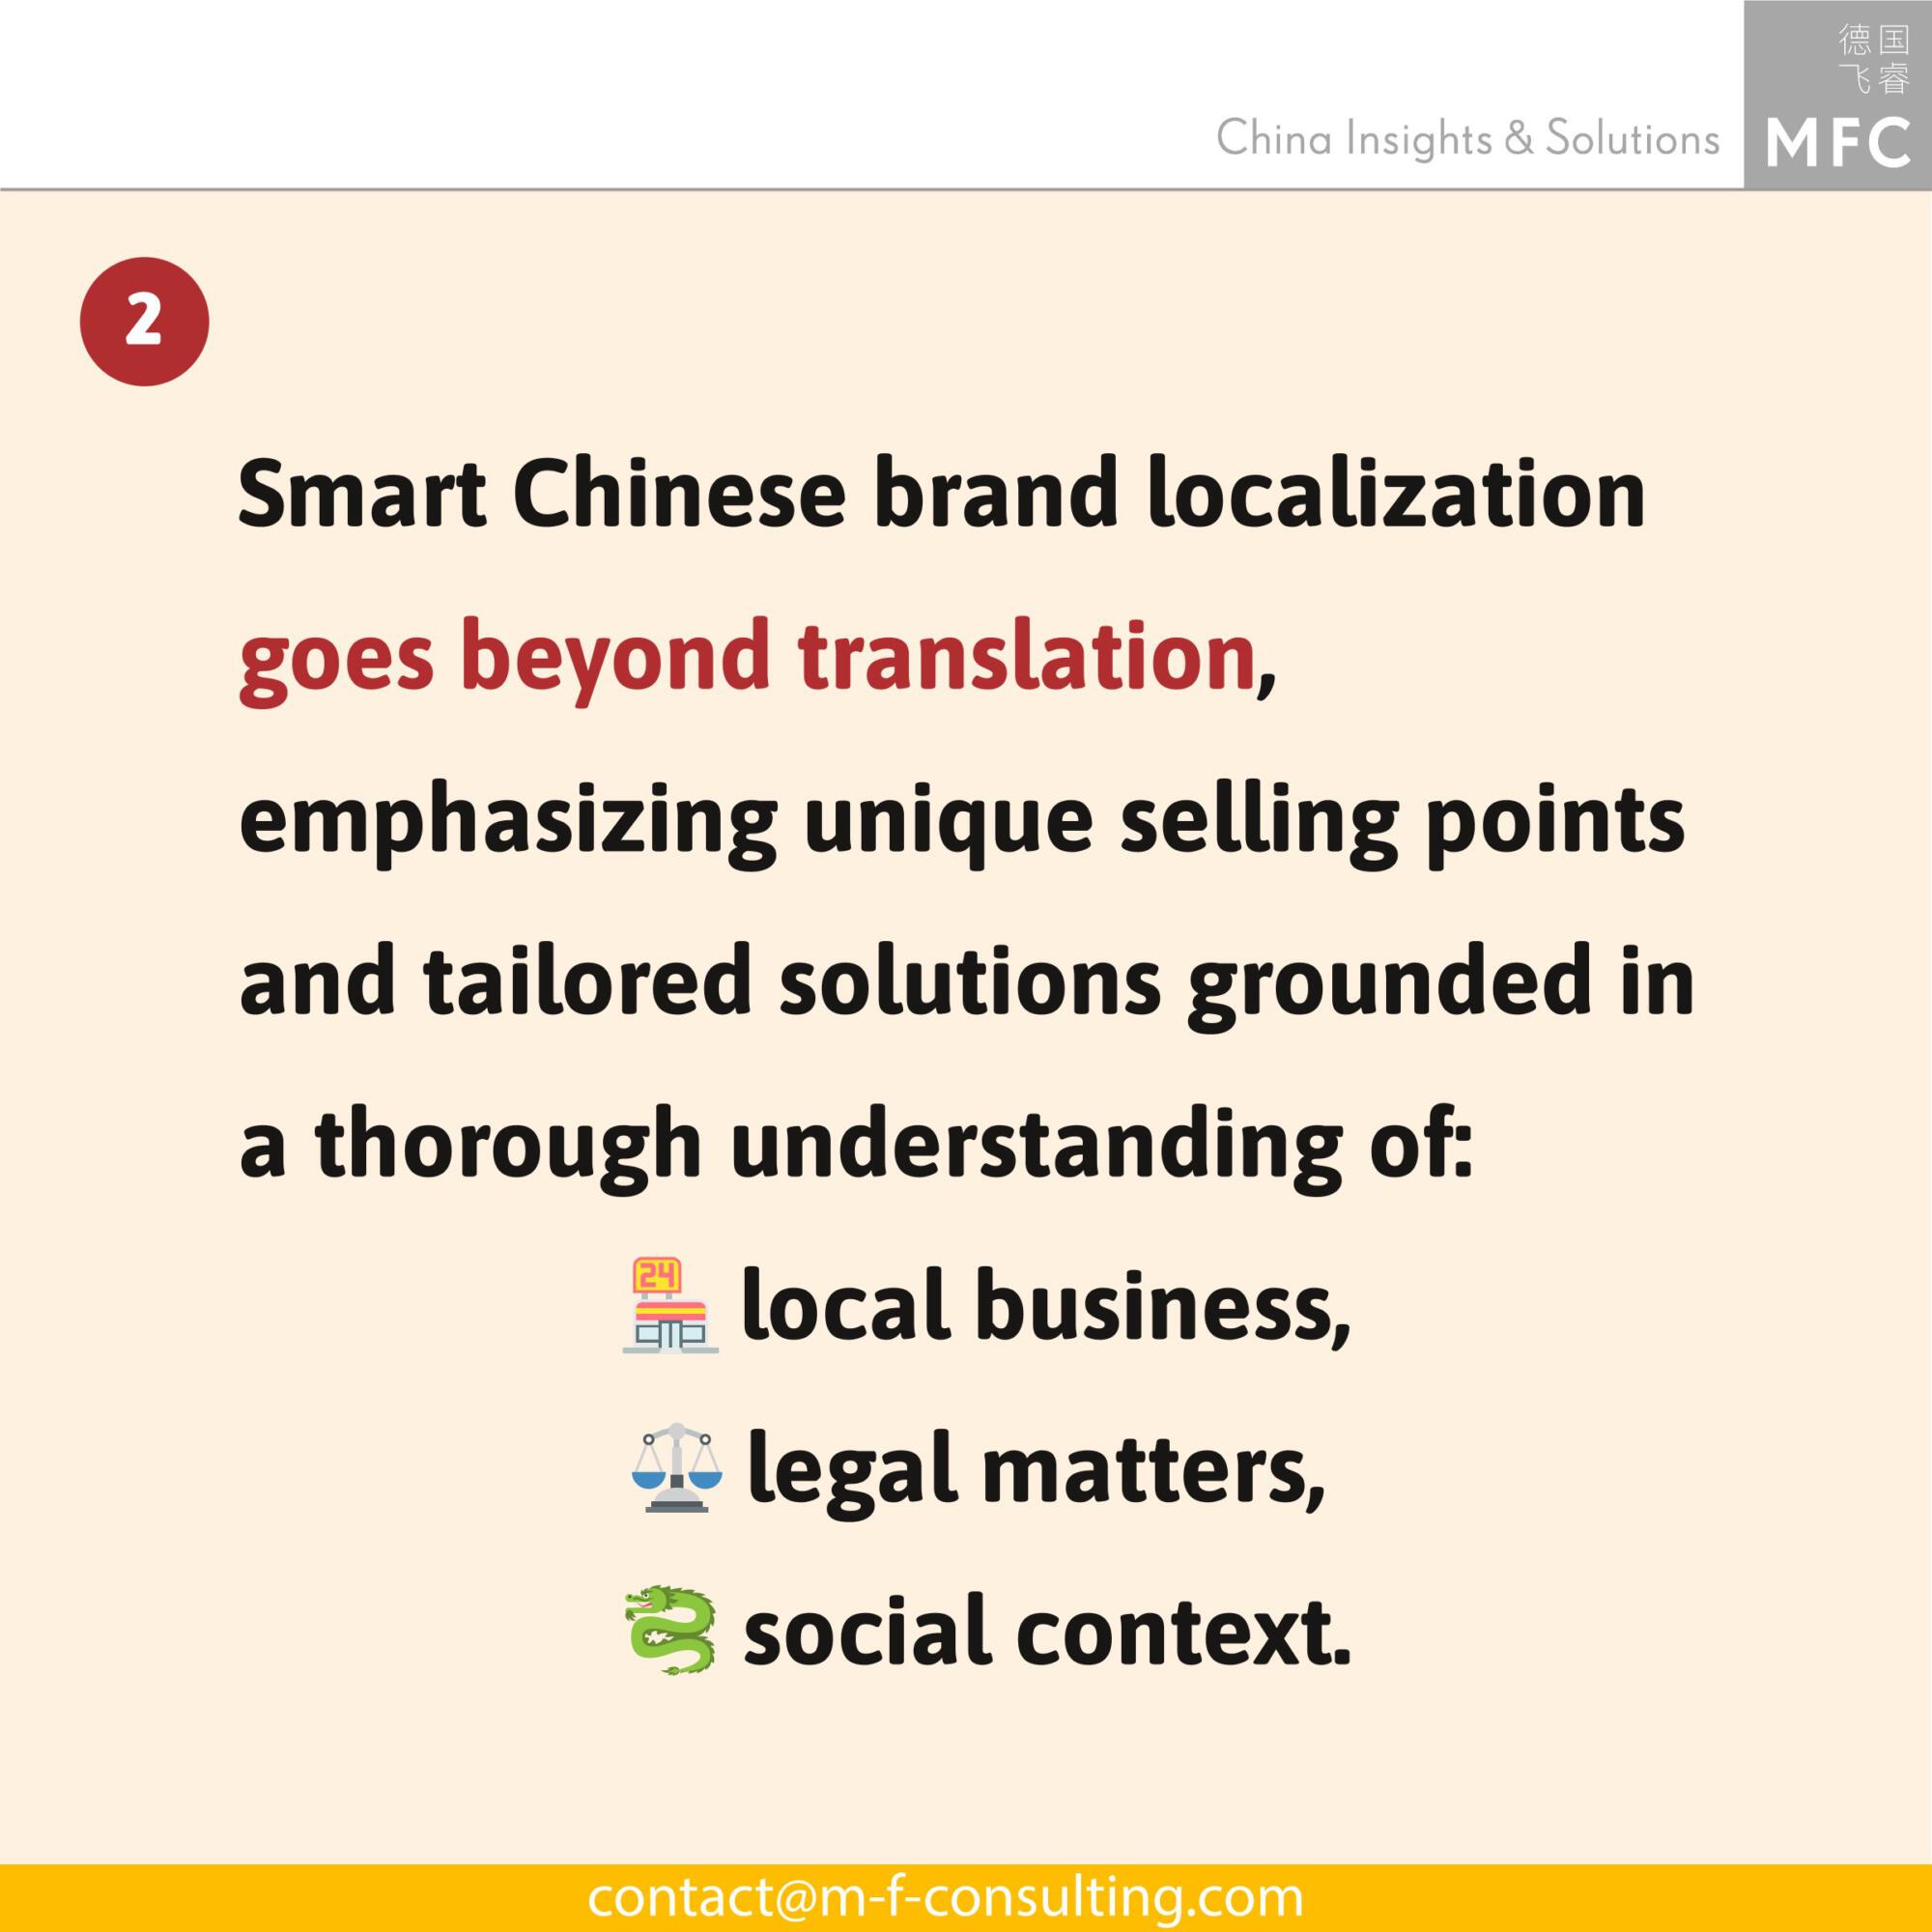 Smart Chinese brand localization goes beyond translation, emphasizing unique selling points and tailored solutions grounded in a thorough understanding of local business, legal matters and social context.